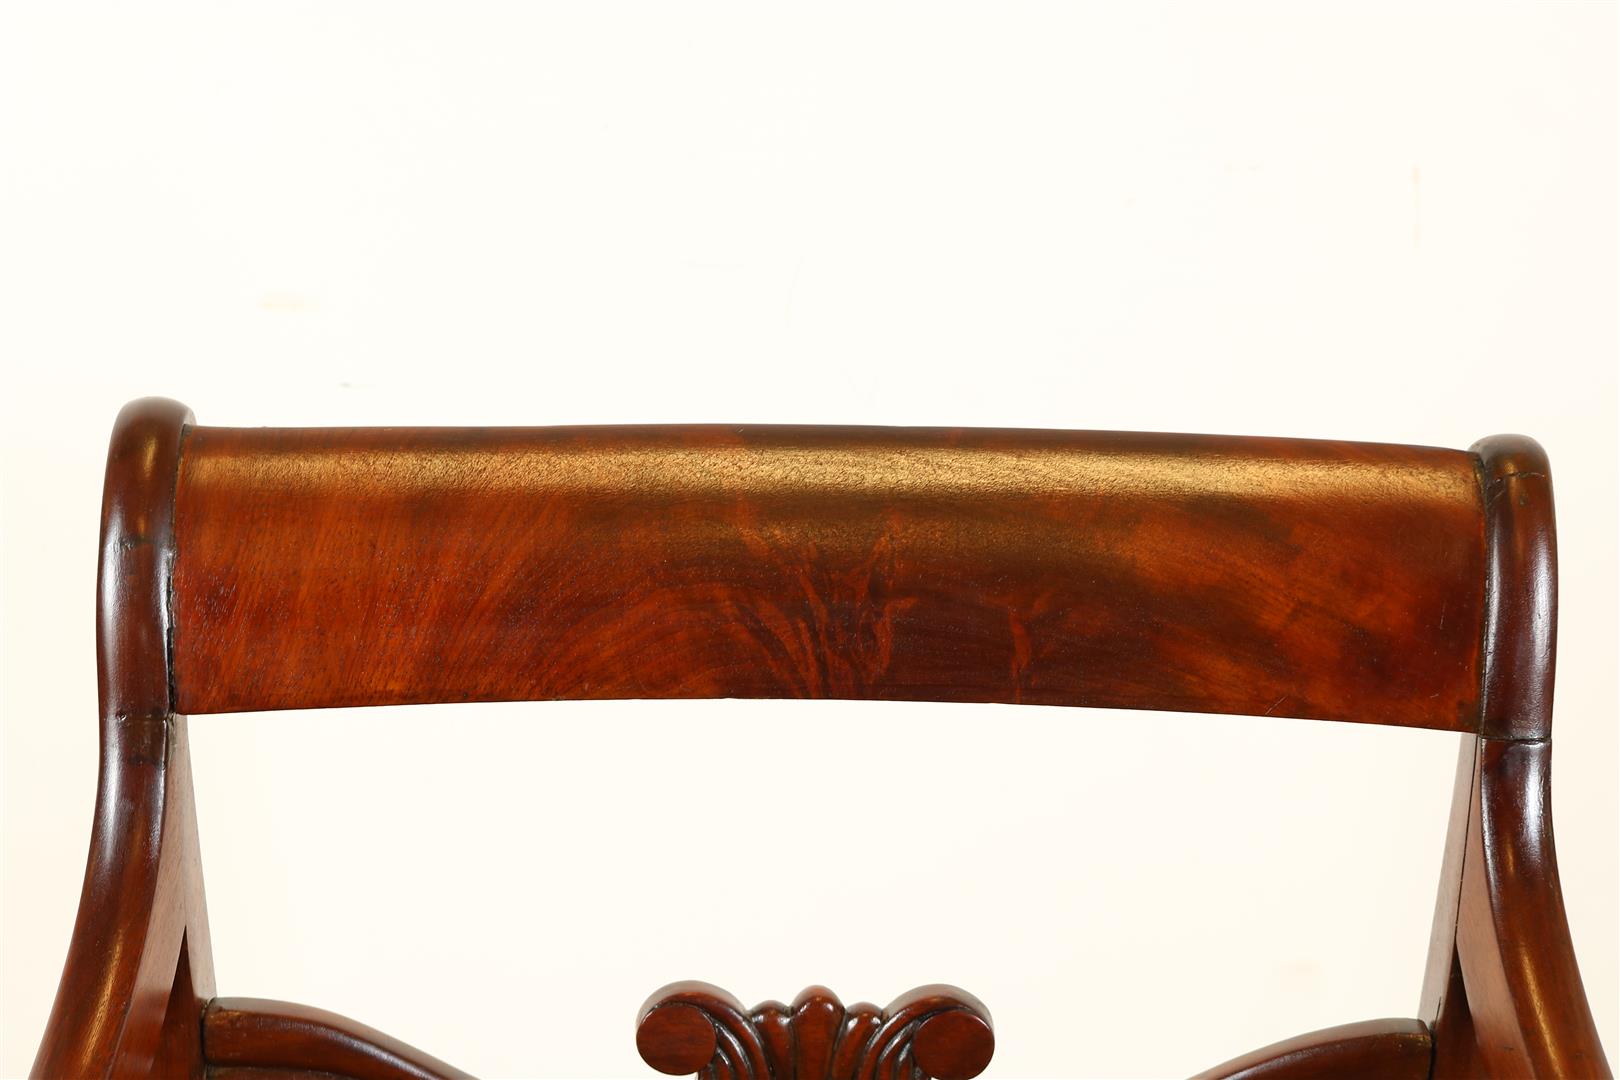 Mahogany Empire office chair with fabric seat, late 19th century. - Image 3 of 4